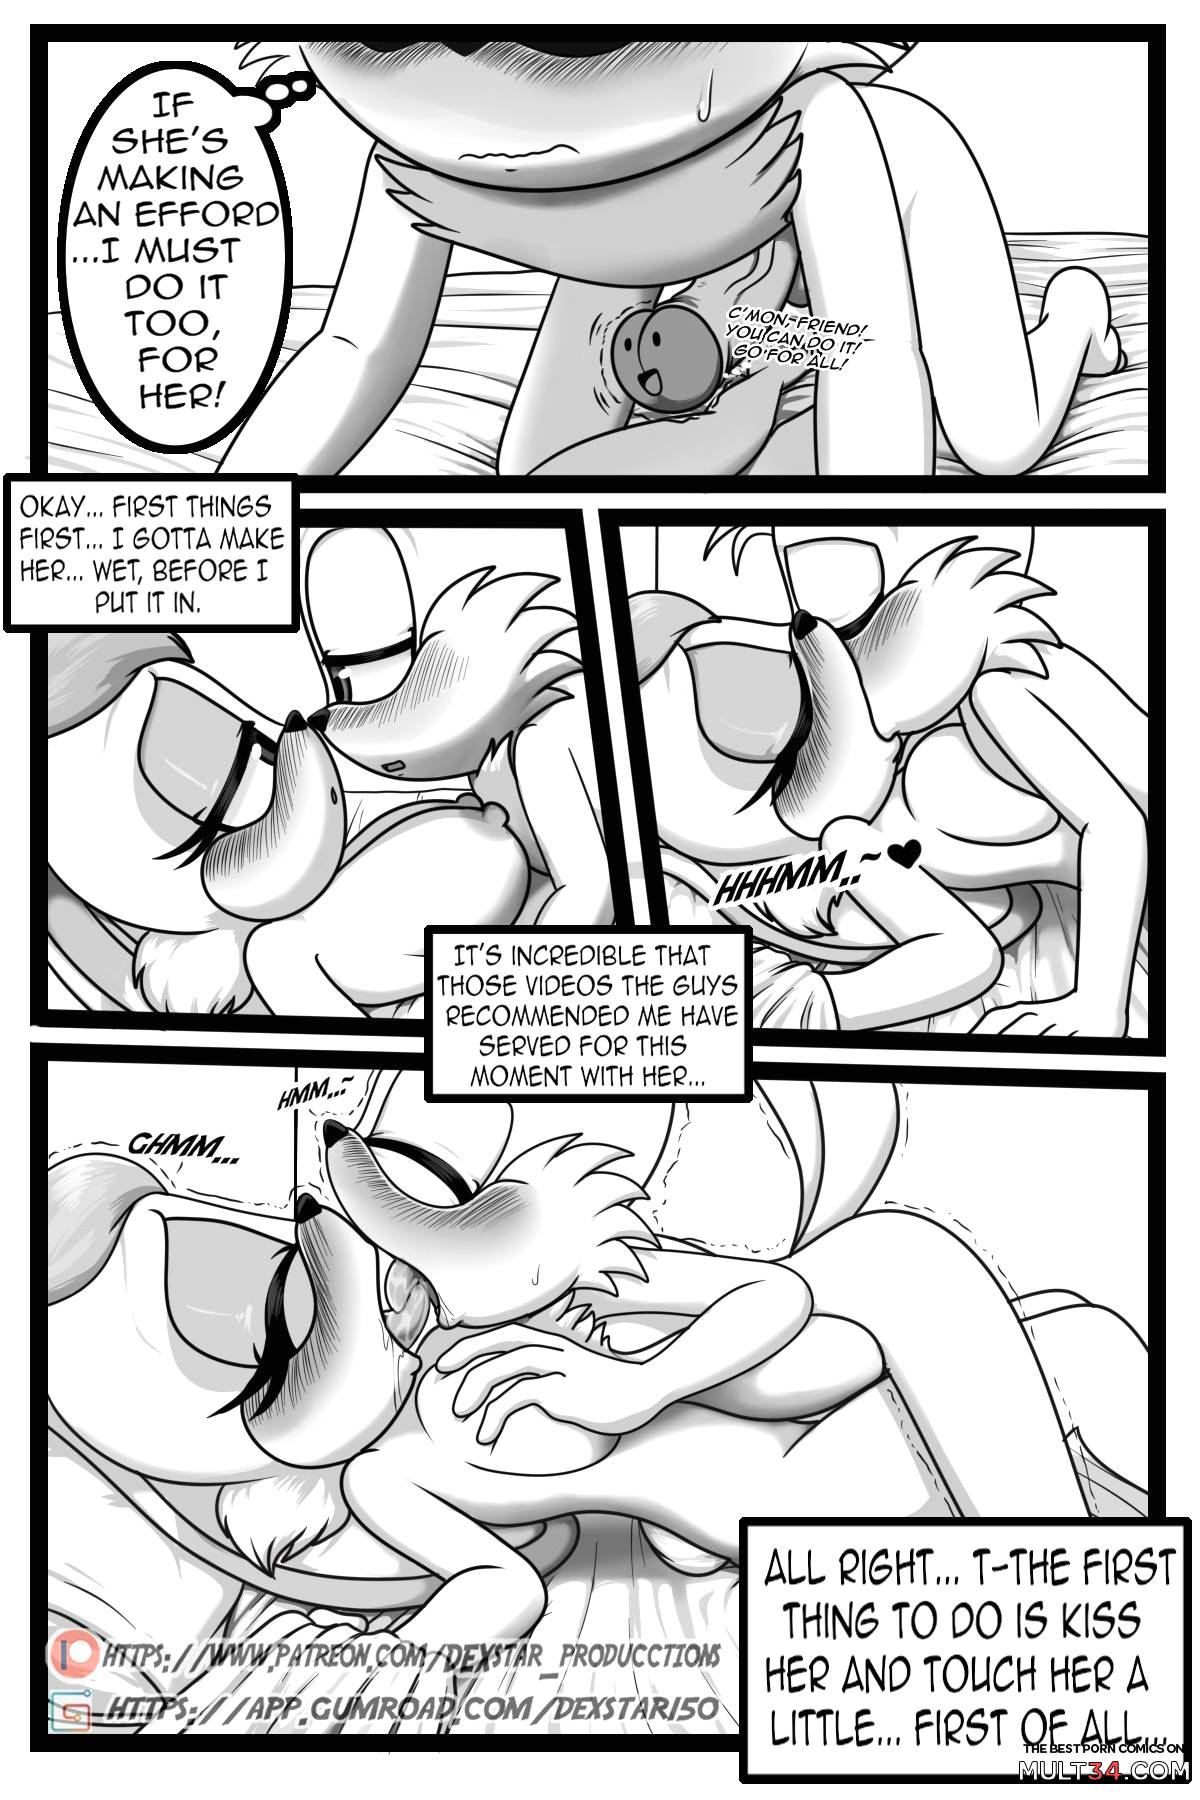 Please Fuck Me: Cream x Tail - Extra Story! page 10